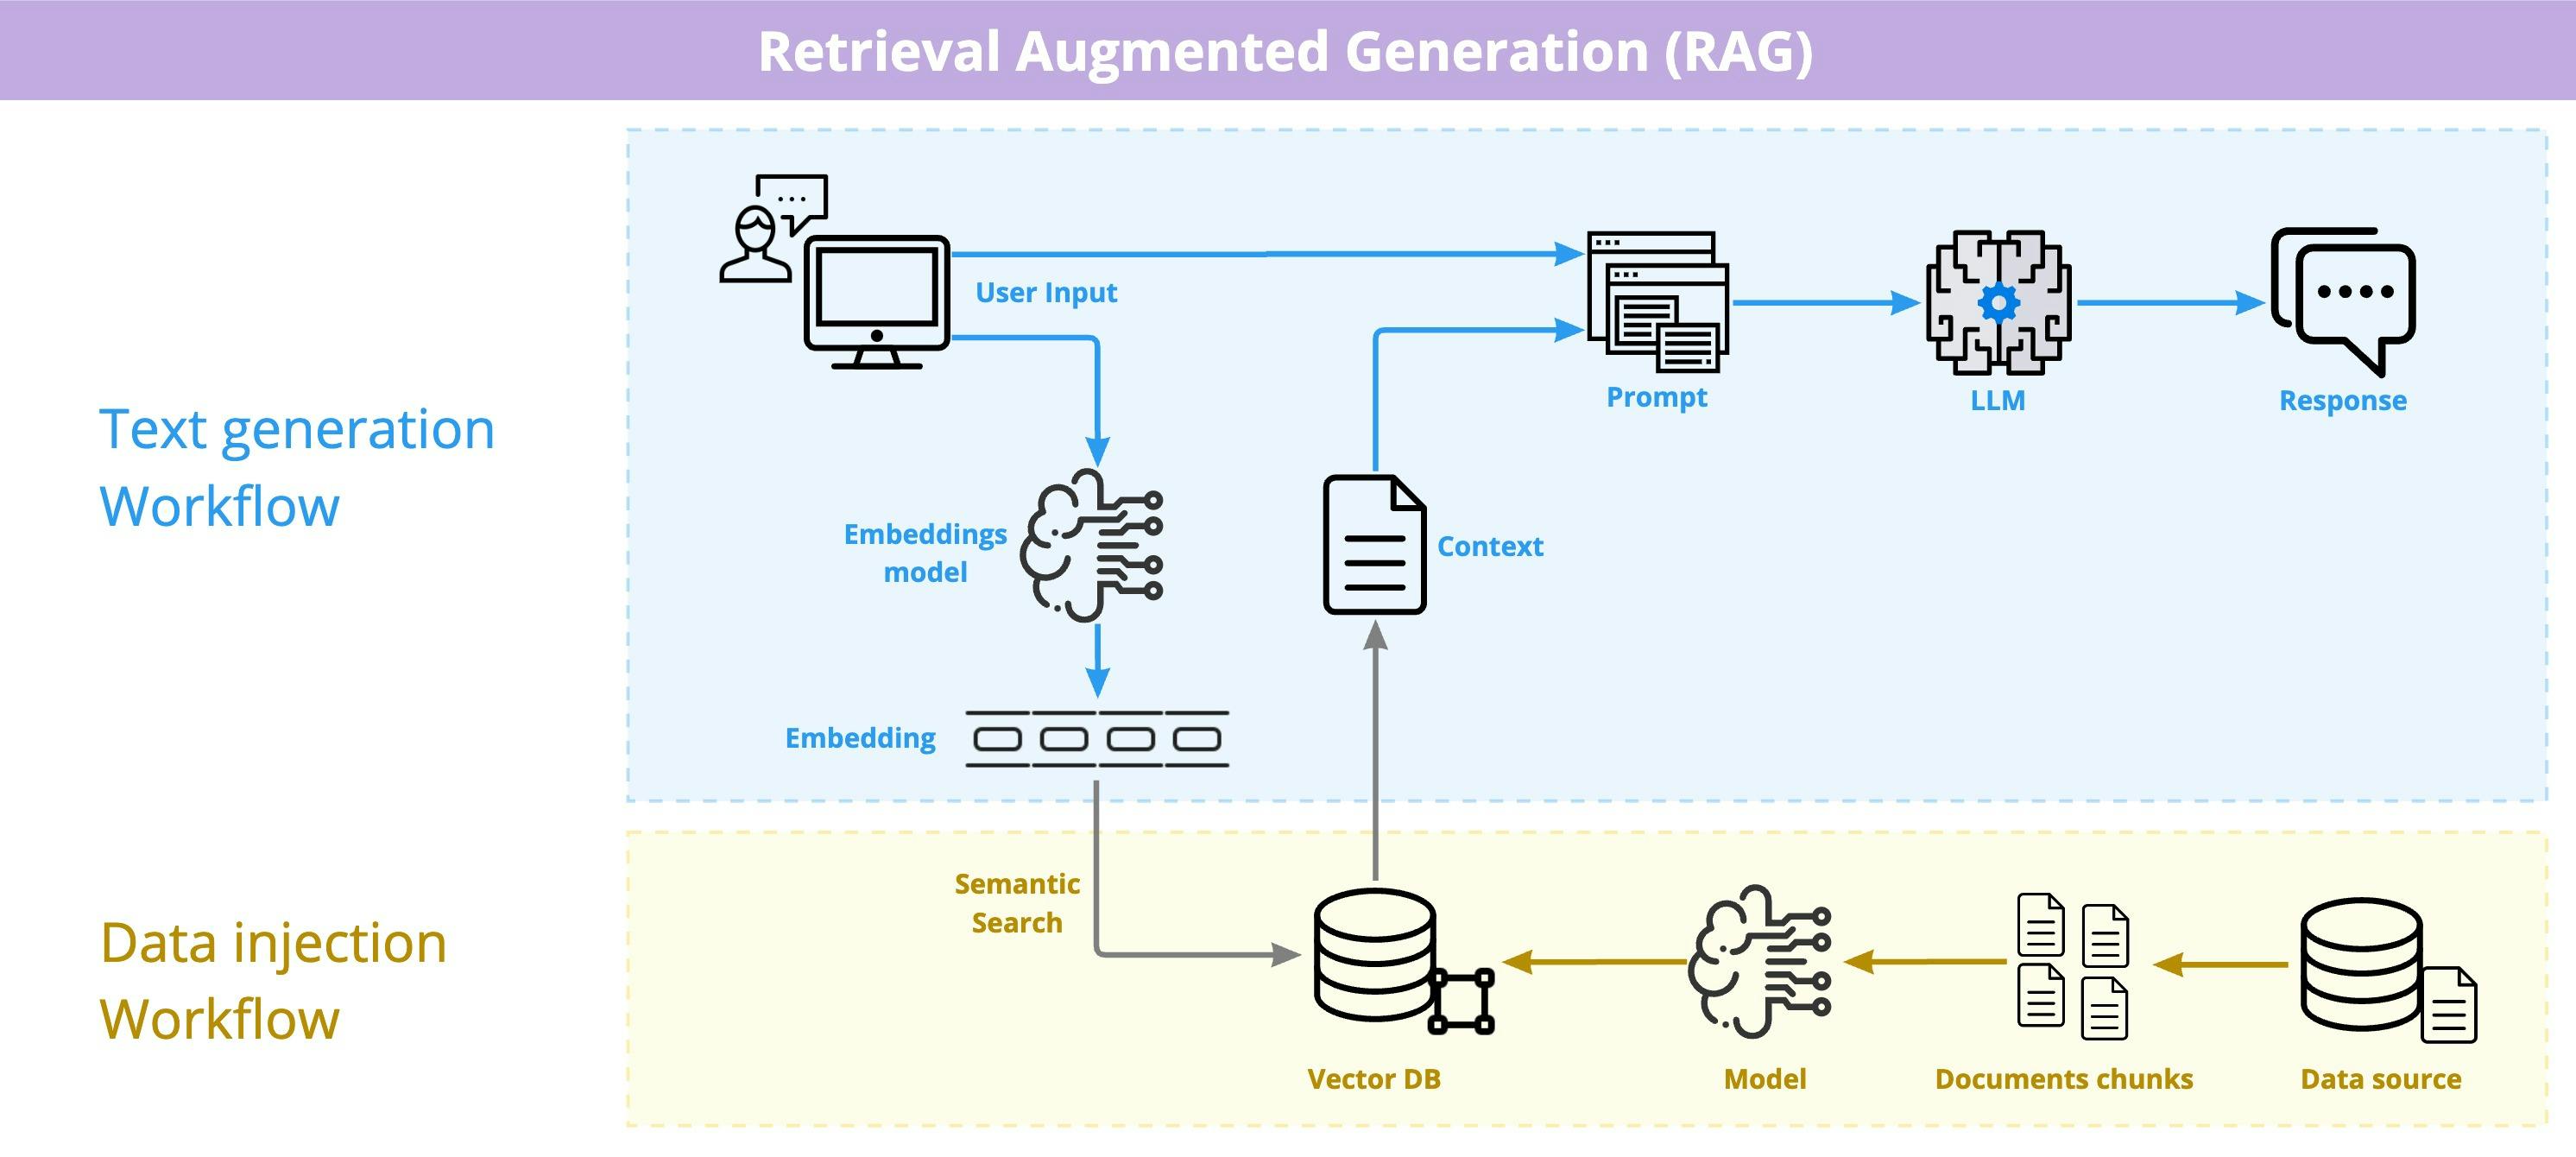 What is Retrieval Augmented Generation (RAG)?